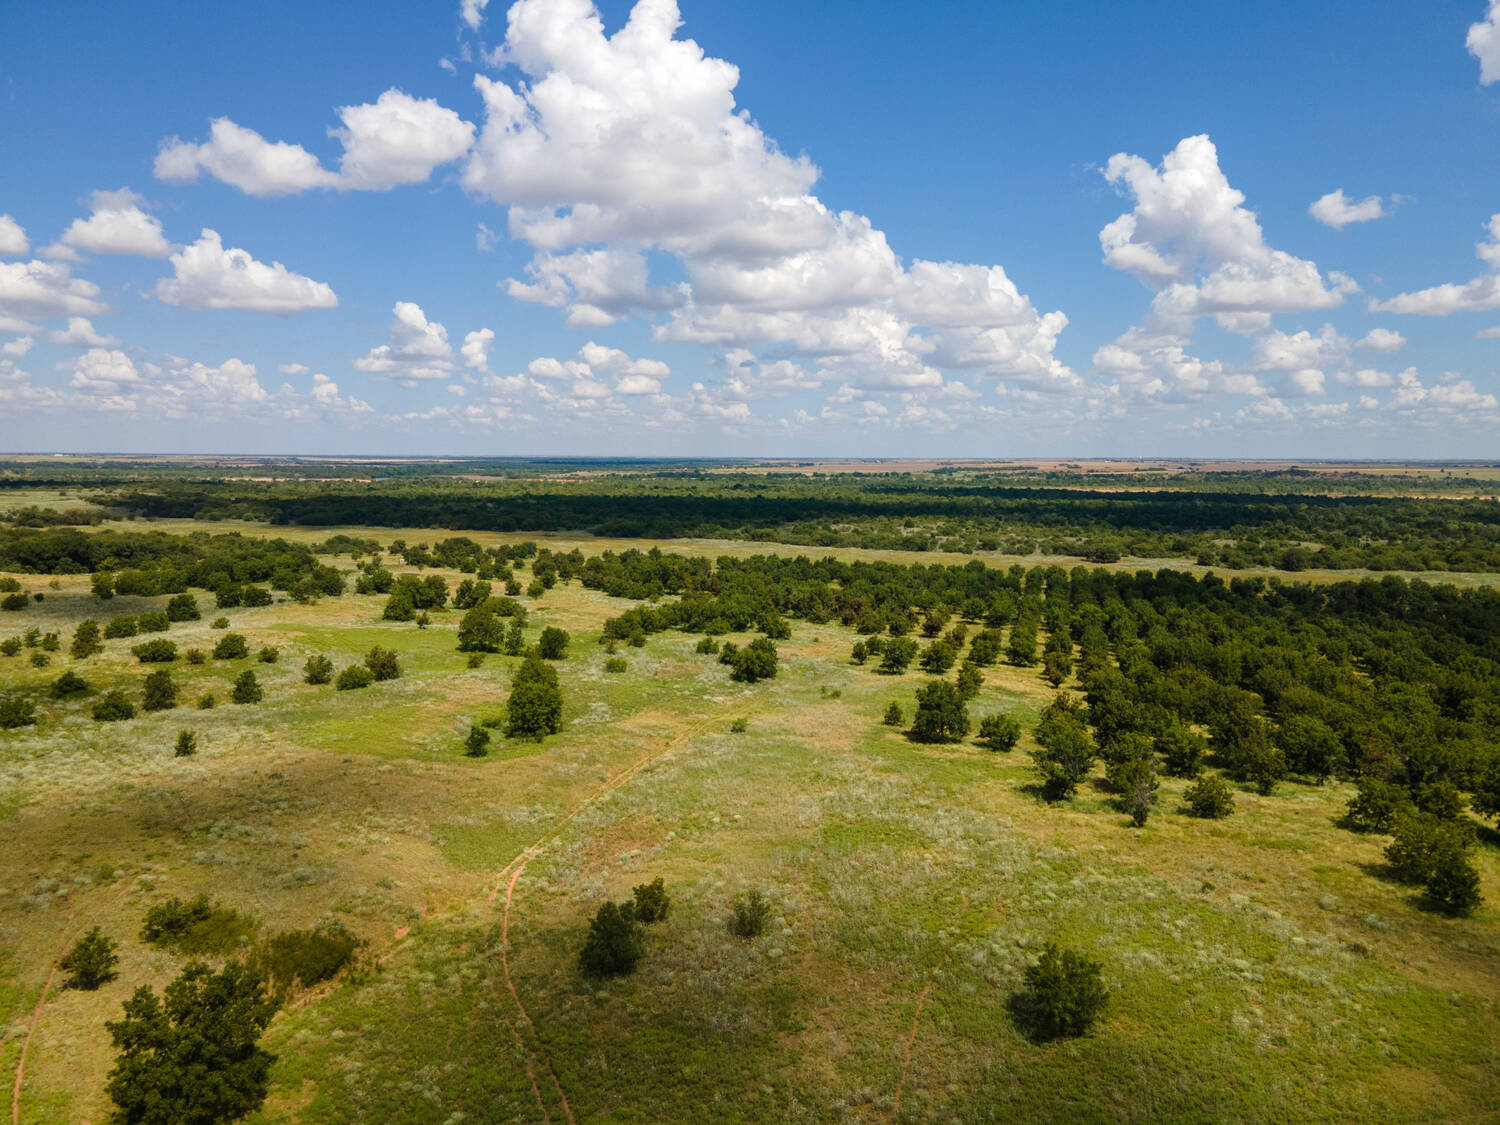 The-Pecan-Tract-Clay-County-Pecan-Orchard-Hunting-Ranch-TX-Republic-Ranches-Bryan-Pickens-9-of-15